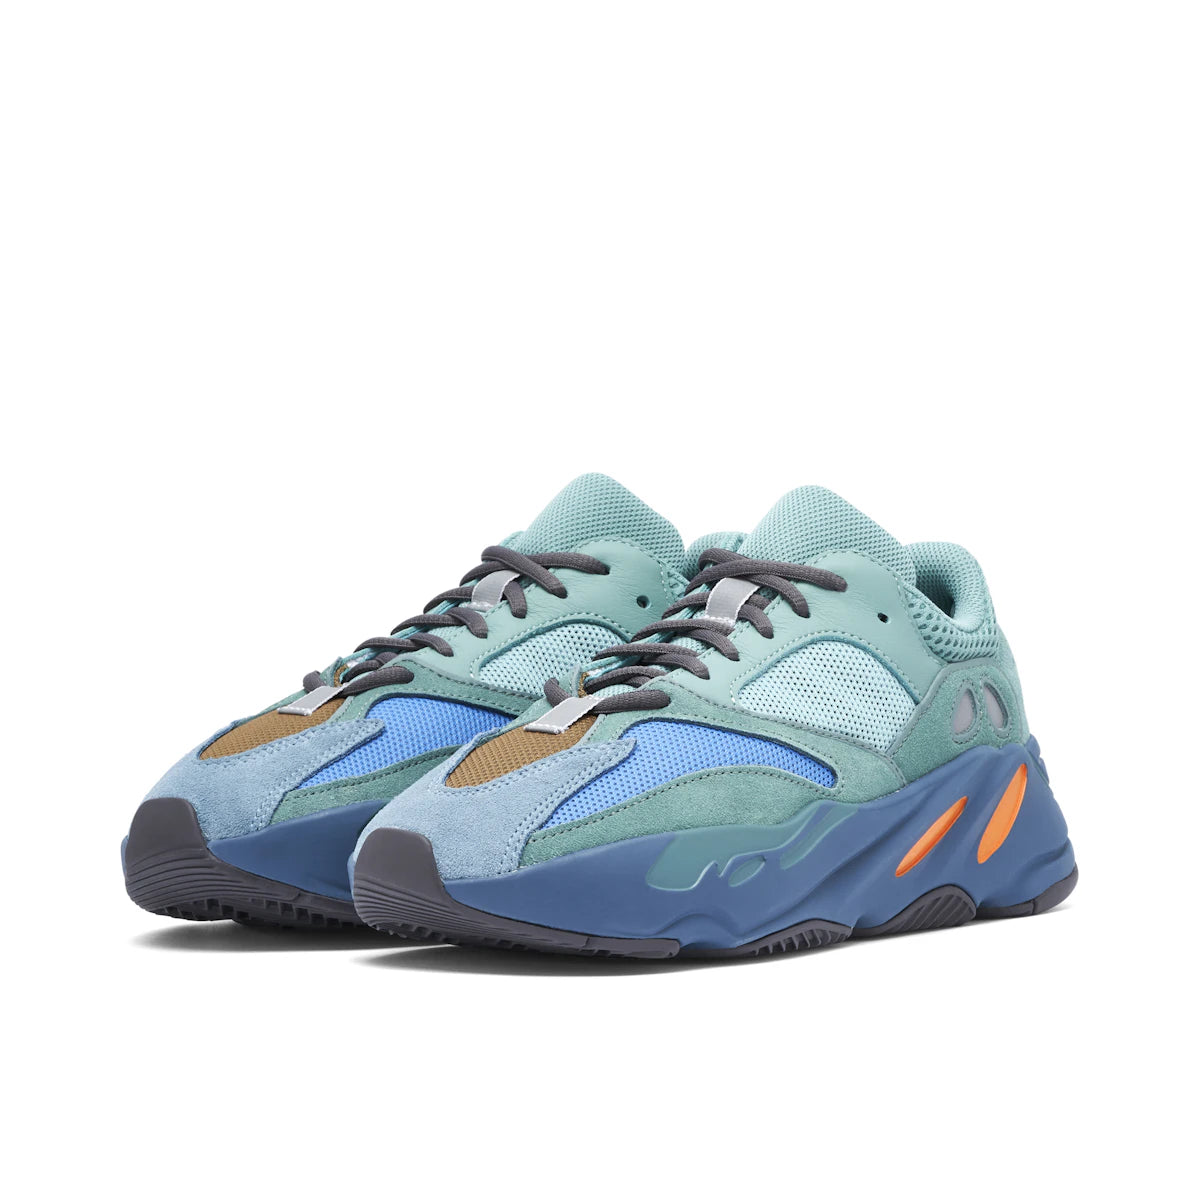 Adidias Yeezy Boost 700 Faded Azure by Yeezy from £300.00